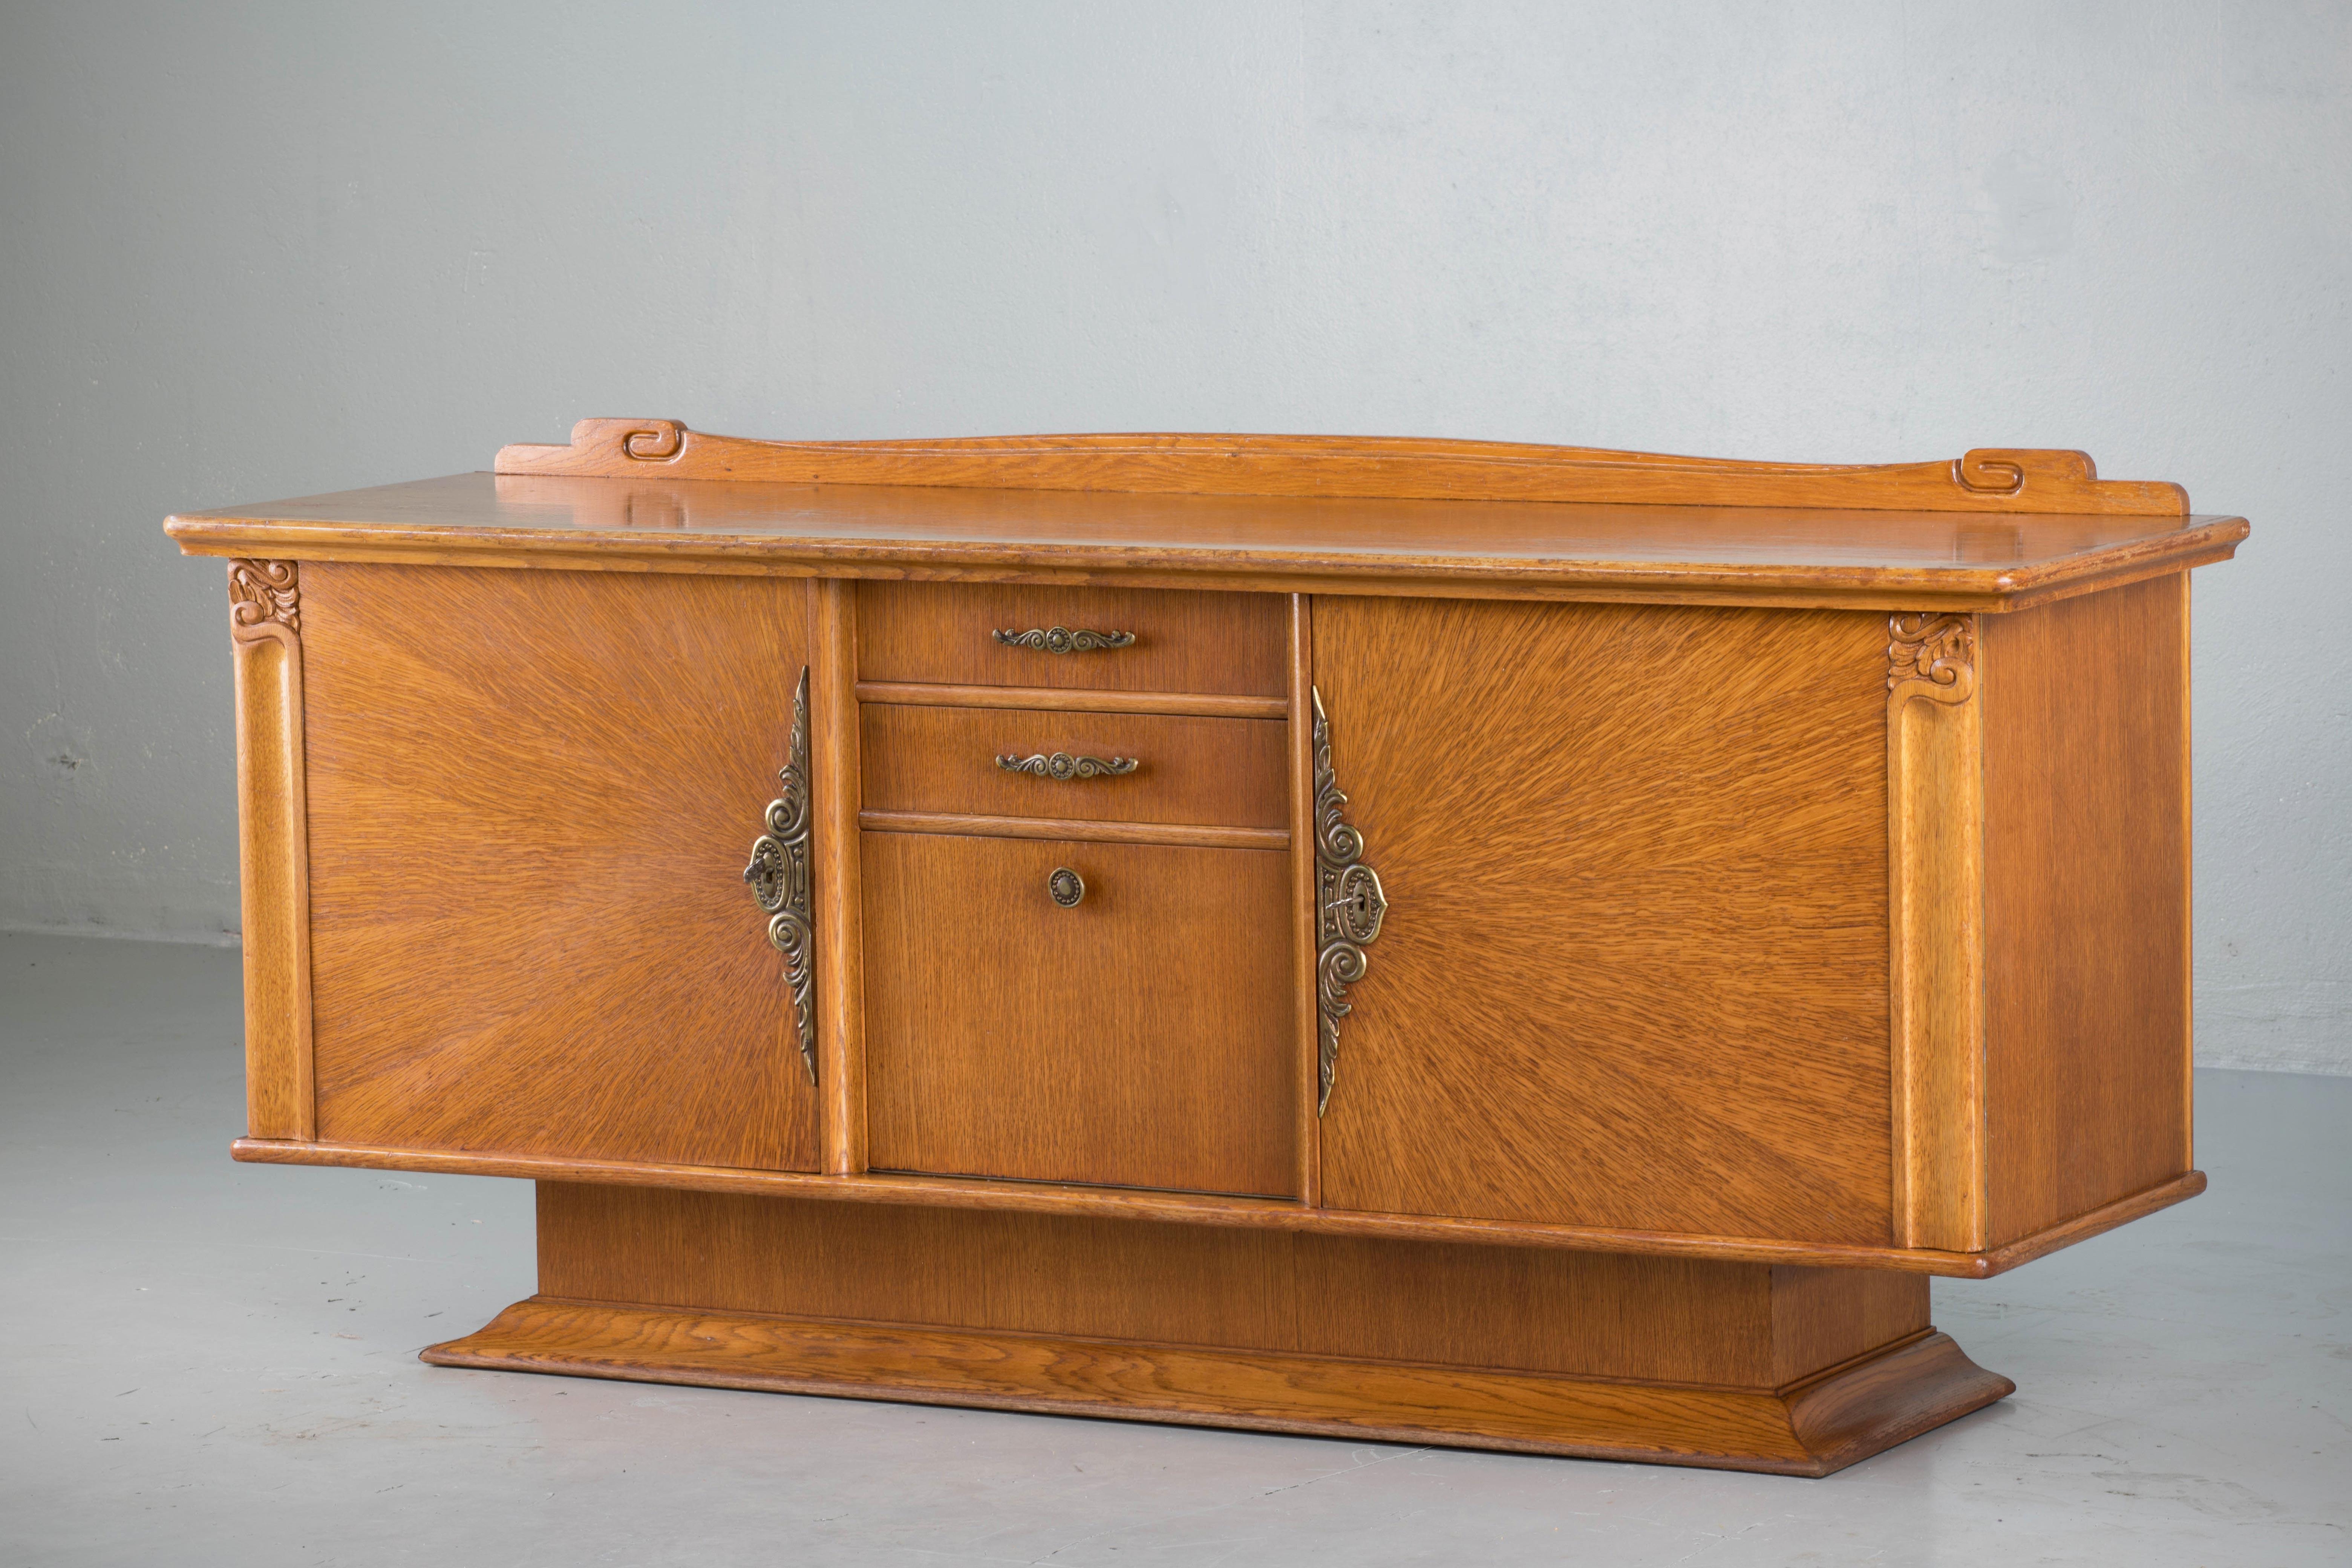 French Art Deco sideboard, credenza, with bar cabinet. The sideboard features stunning oakwood grain with a fan veneer. It offers ample storage, with shelve behind two doors on the left and a dovetailed drawer and additional shelving behind two